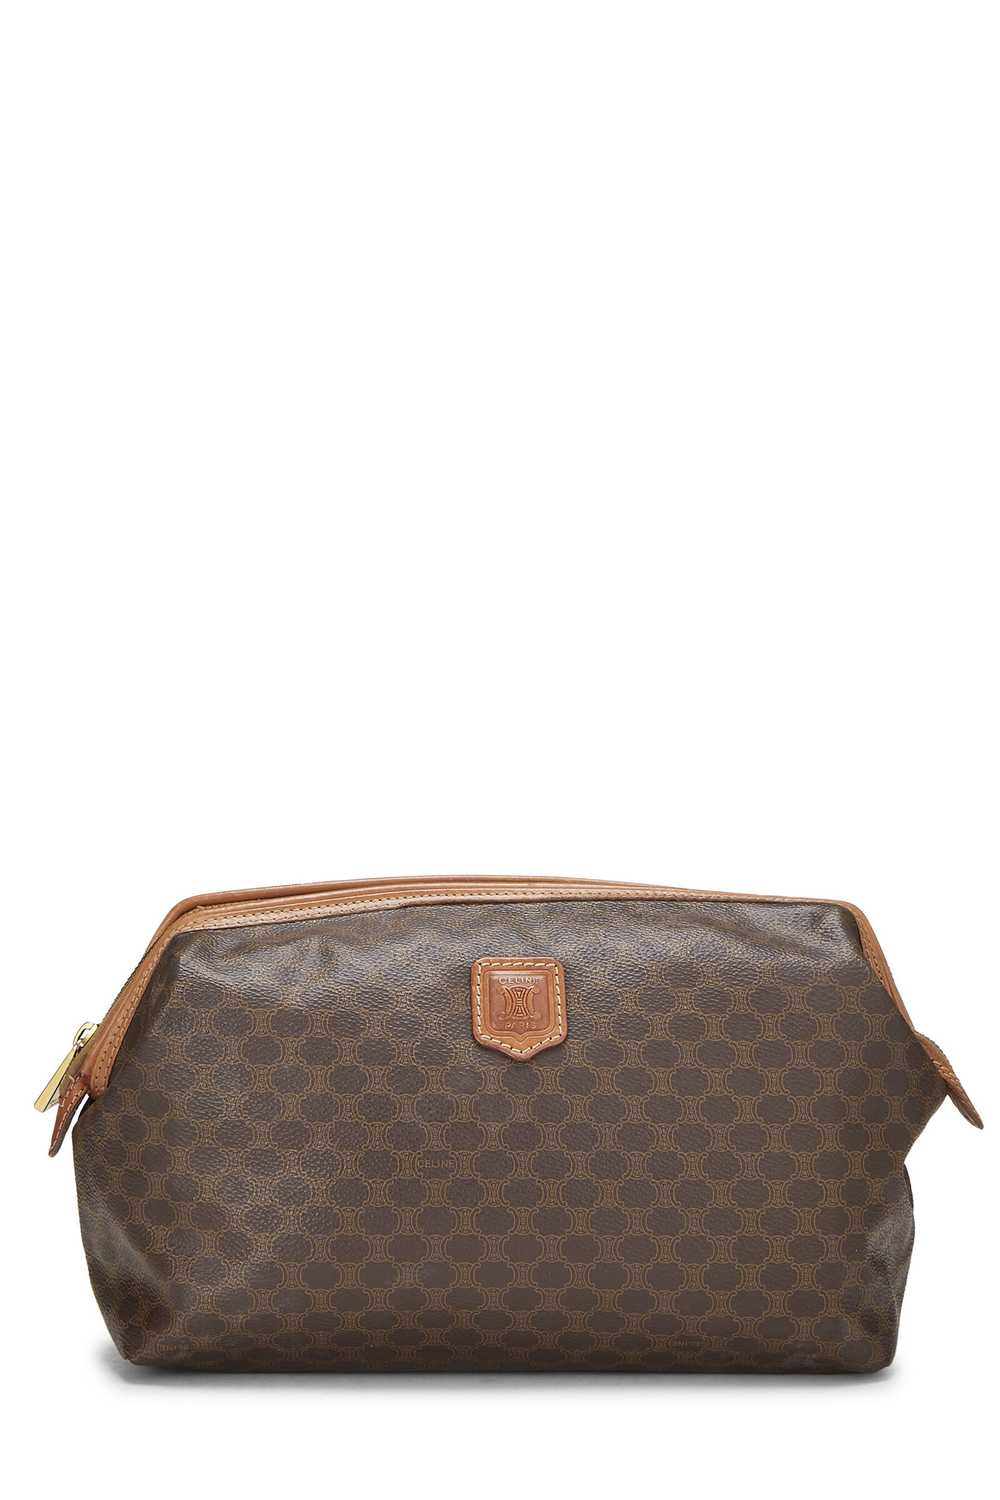 Brown Coated Canvas Macadam Pouch - image 1